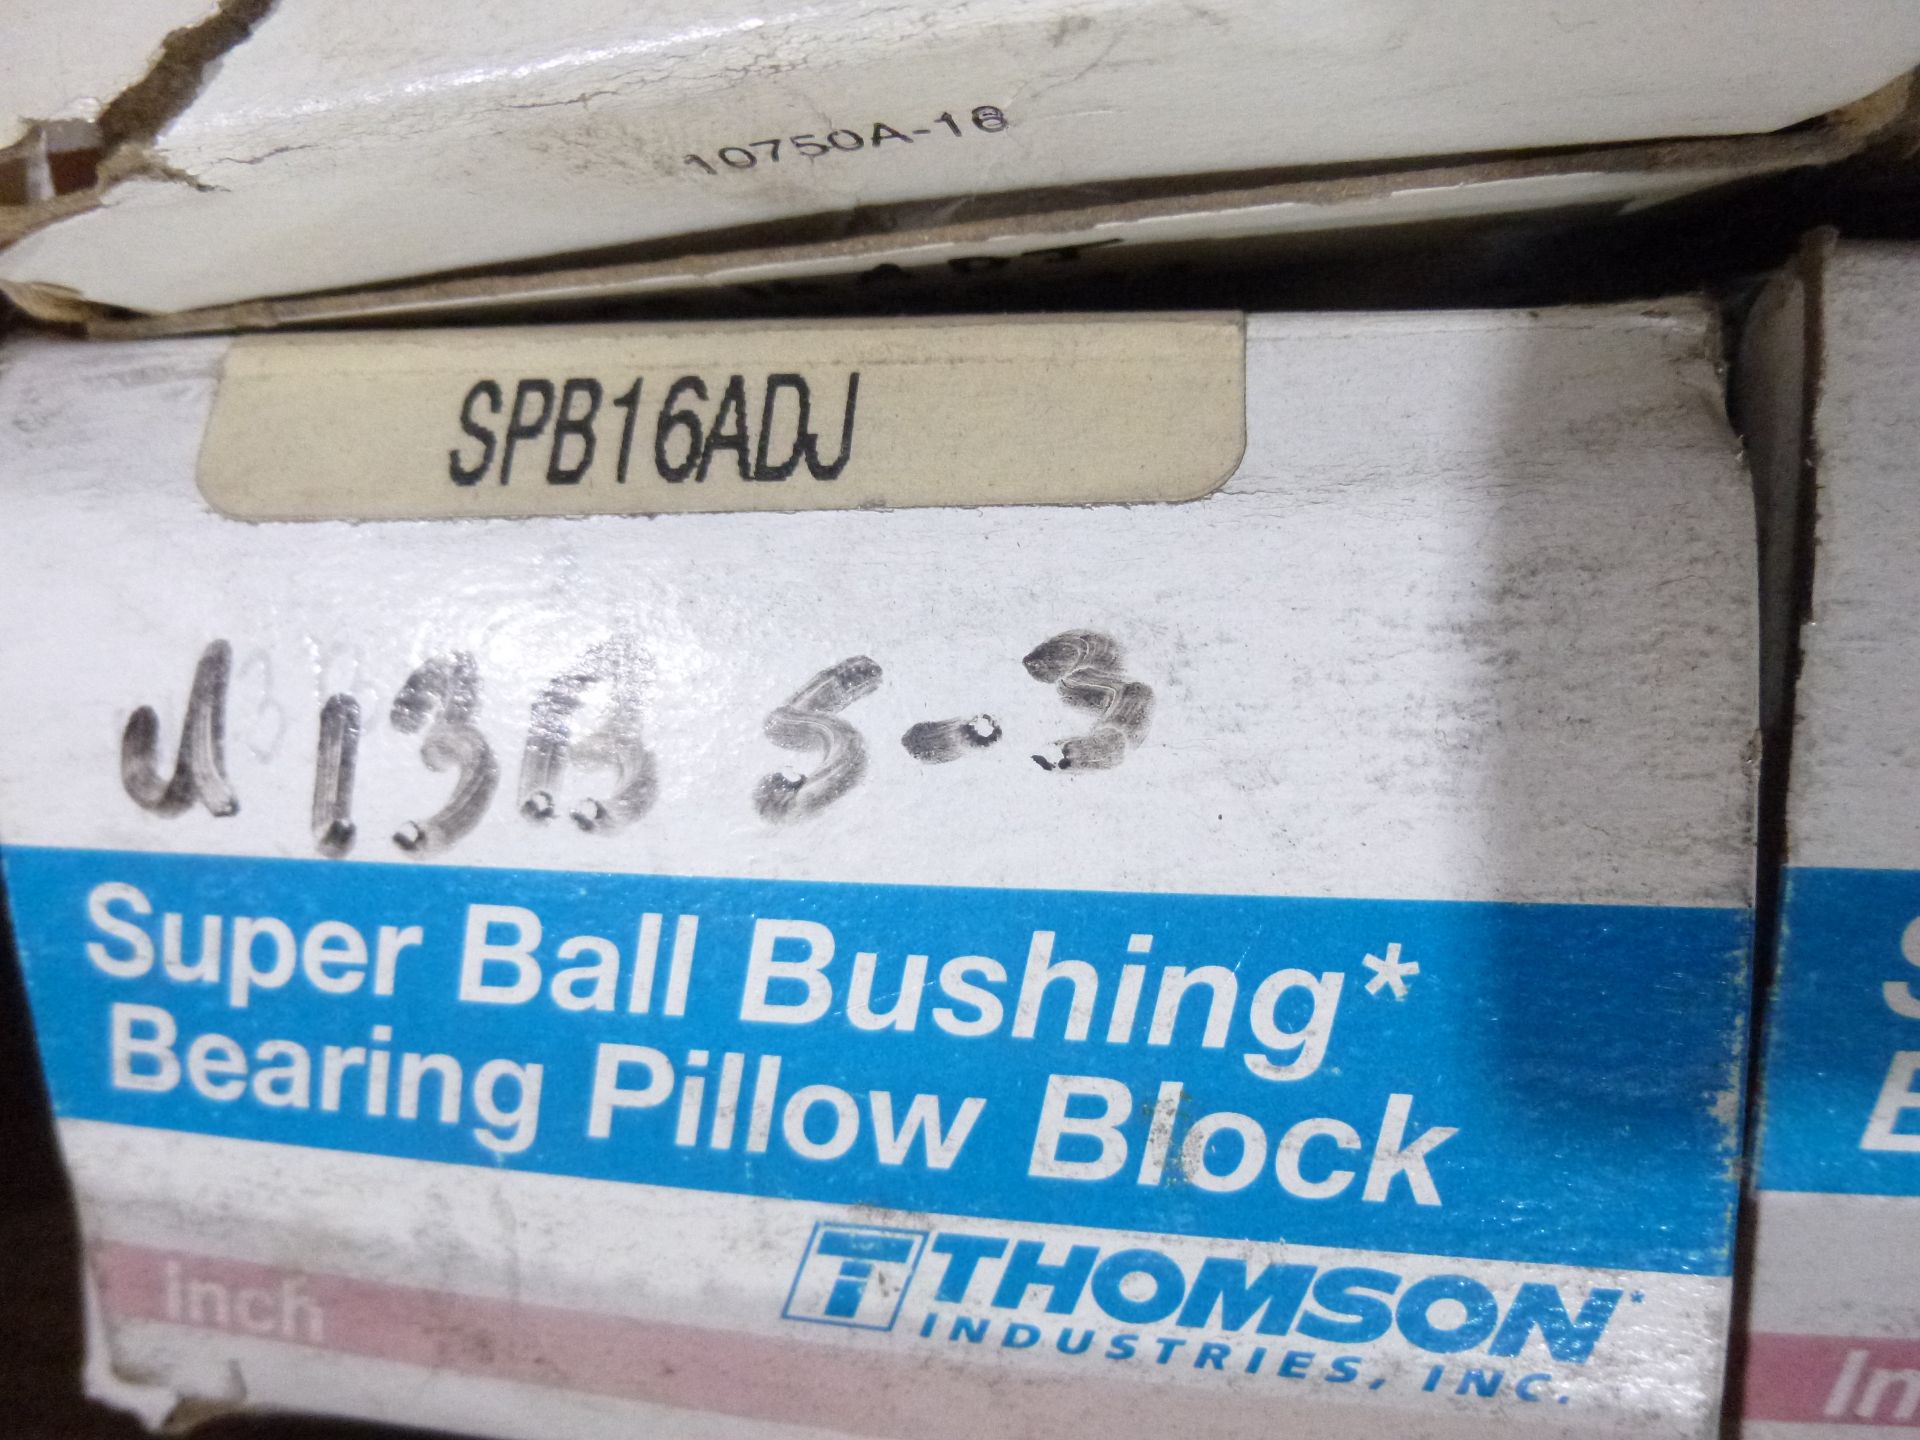 Qty 4 Thomson bearing pillow block, model SPB16ADJ, new in boxes, boxes show shelf wear, as always - Image 2 of 2